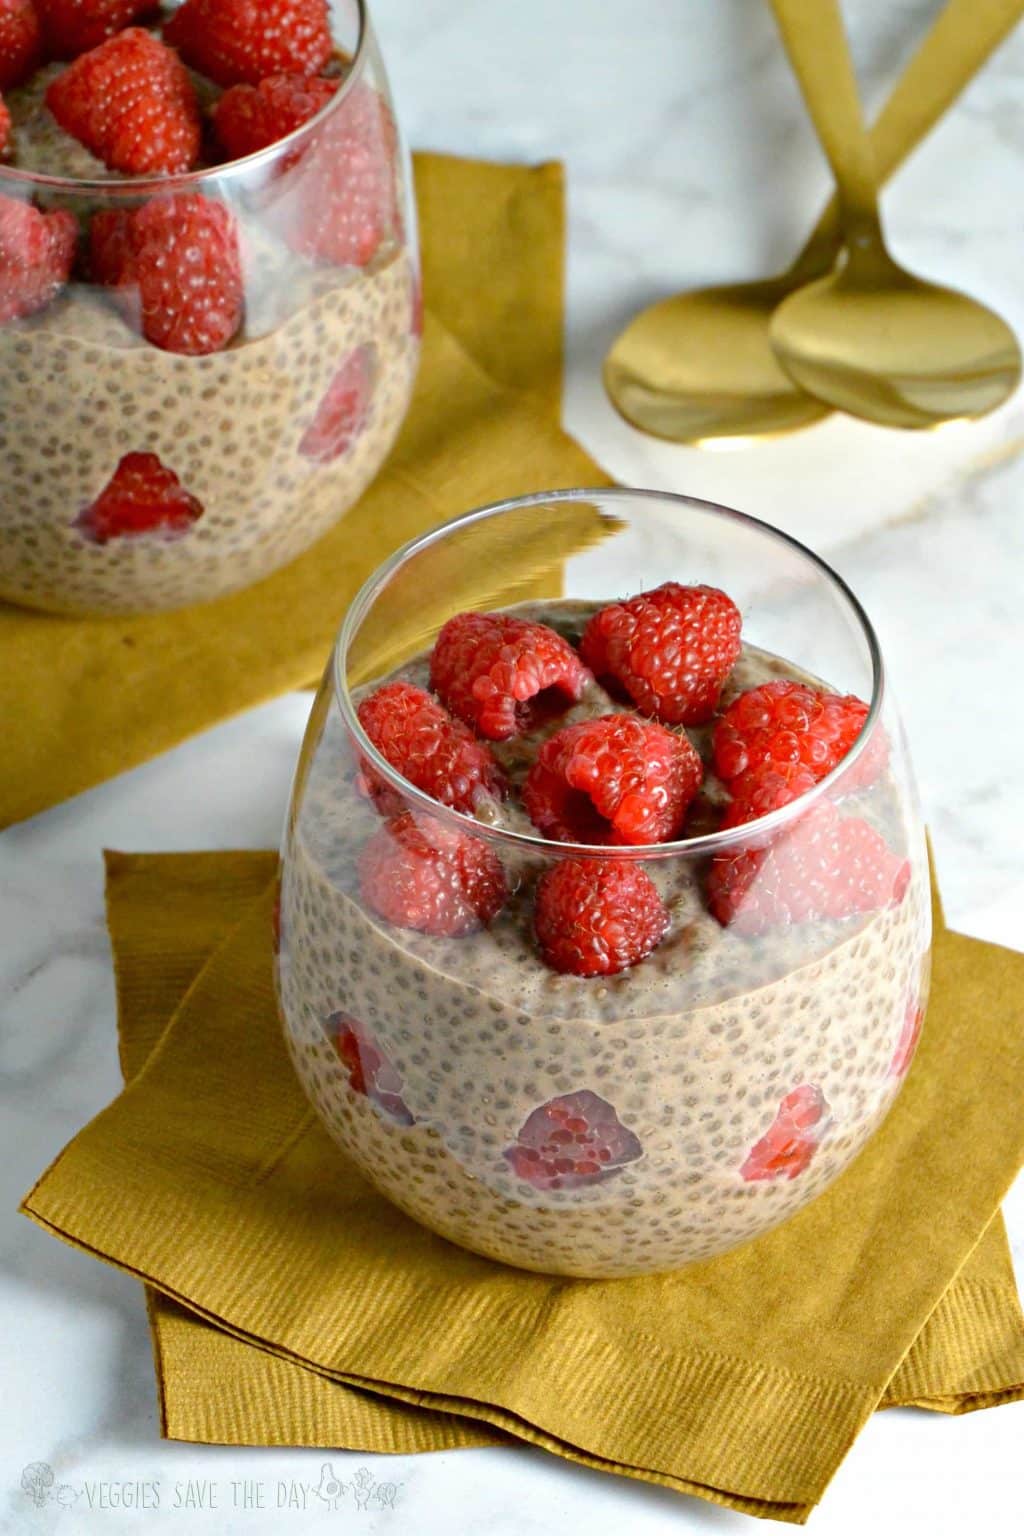 Chocolate Chia Pudding with fresh raspberries in a dessert glass